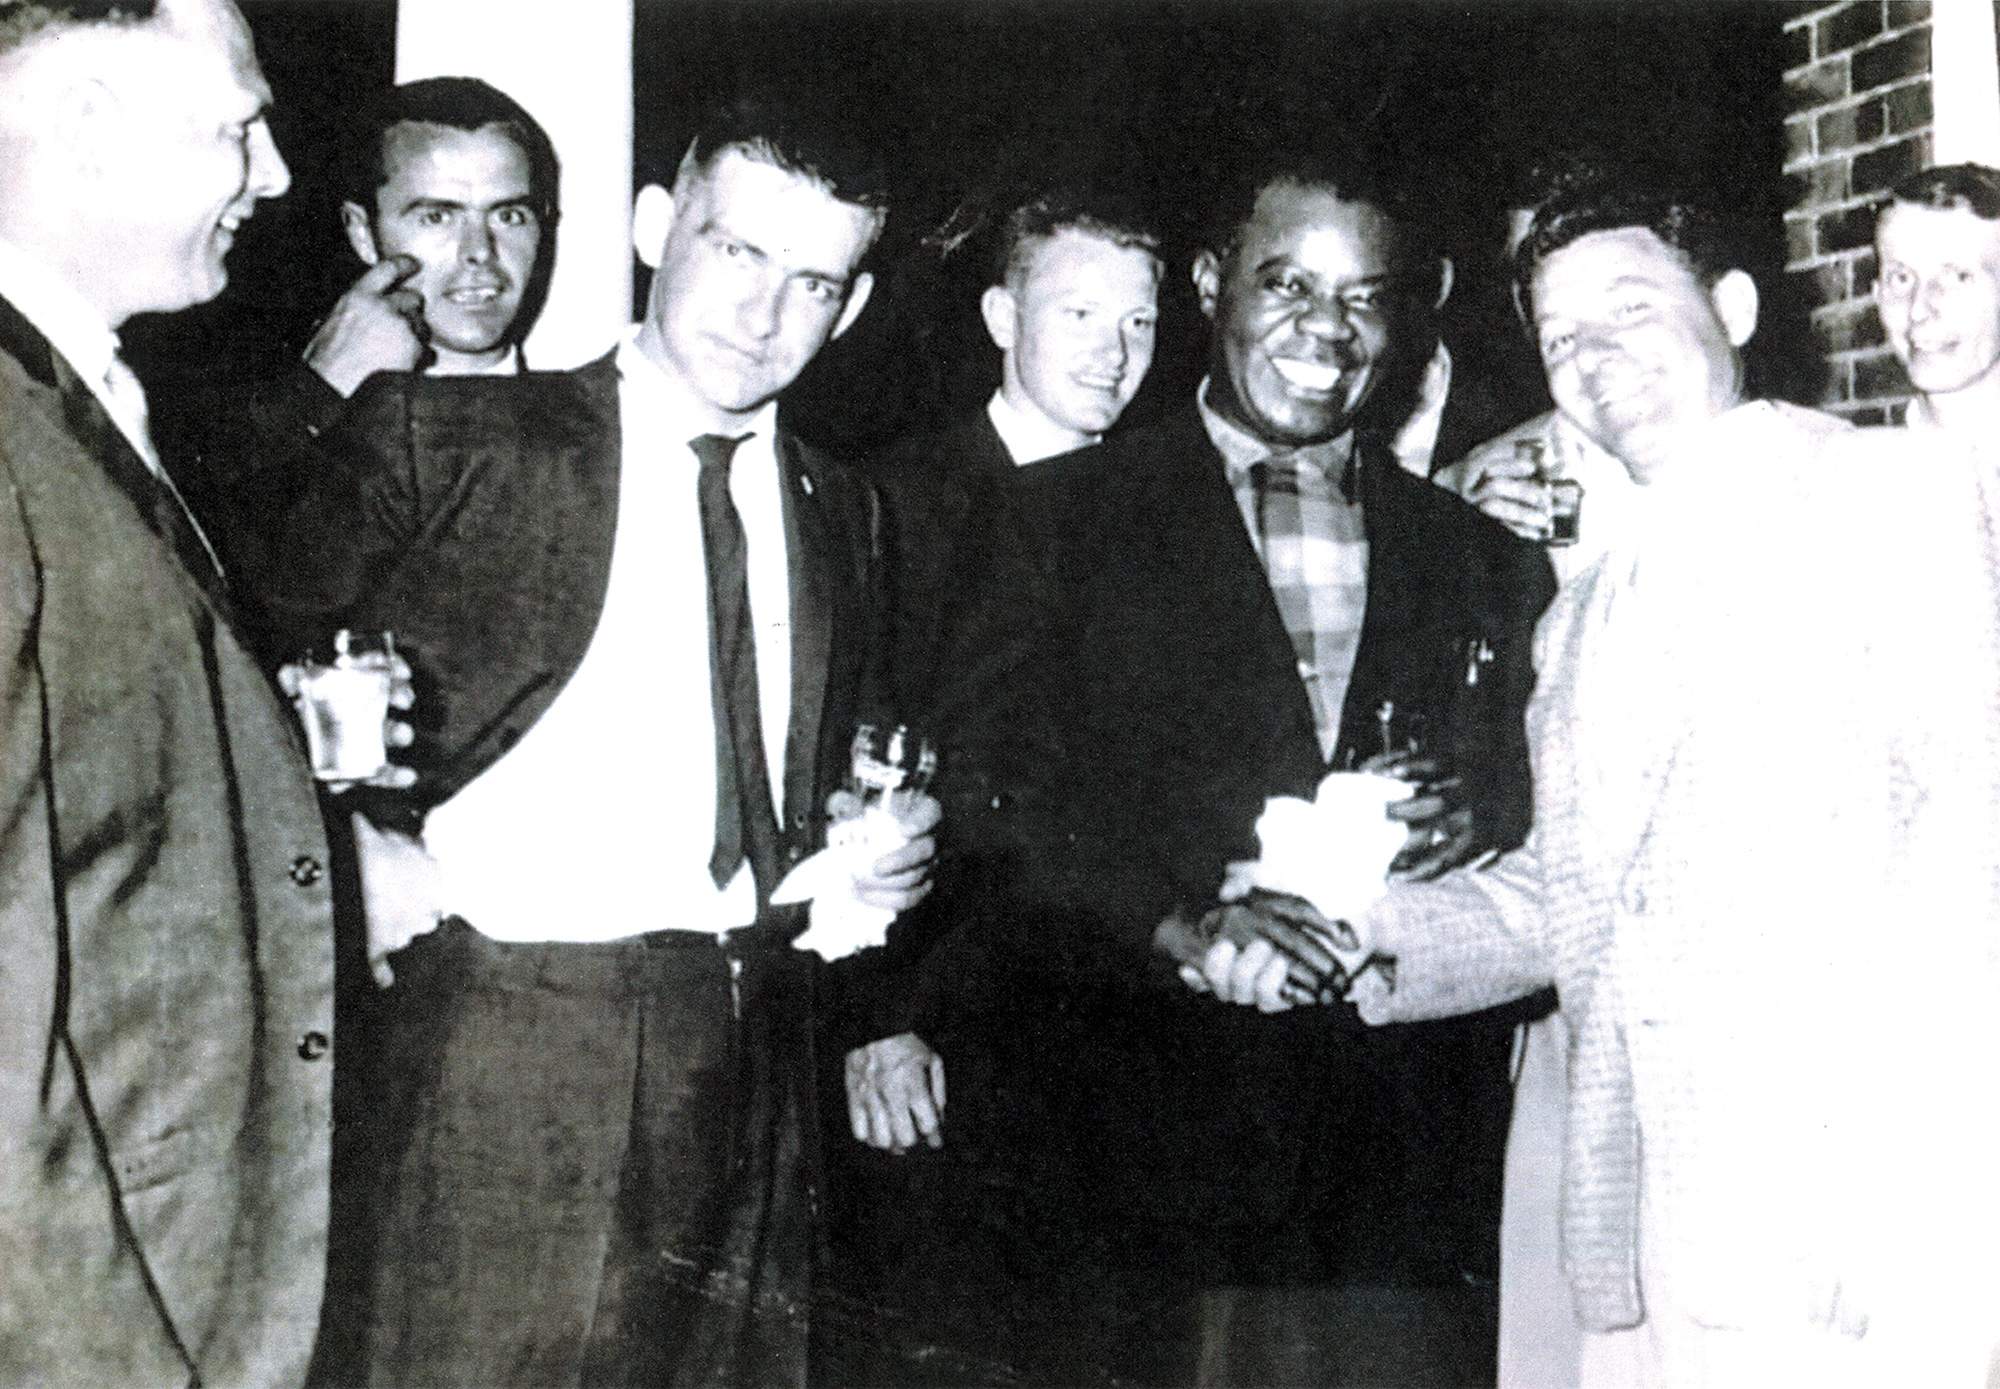 Louis Armstrong in Collingwood. Left to right: unknown, unknown, Buddy Brown, Roger Lockhart, Louis Armstrong, Sam Prezio, John Scheffer.